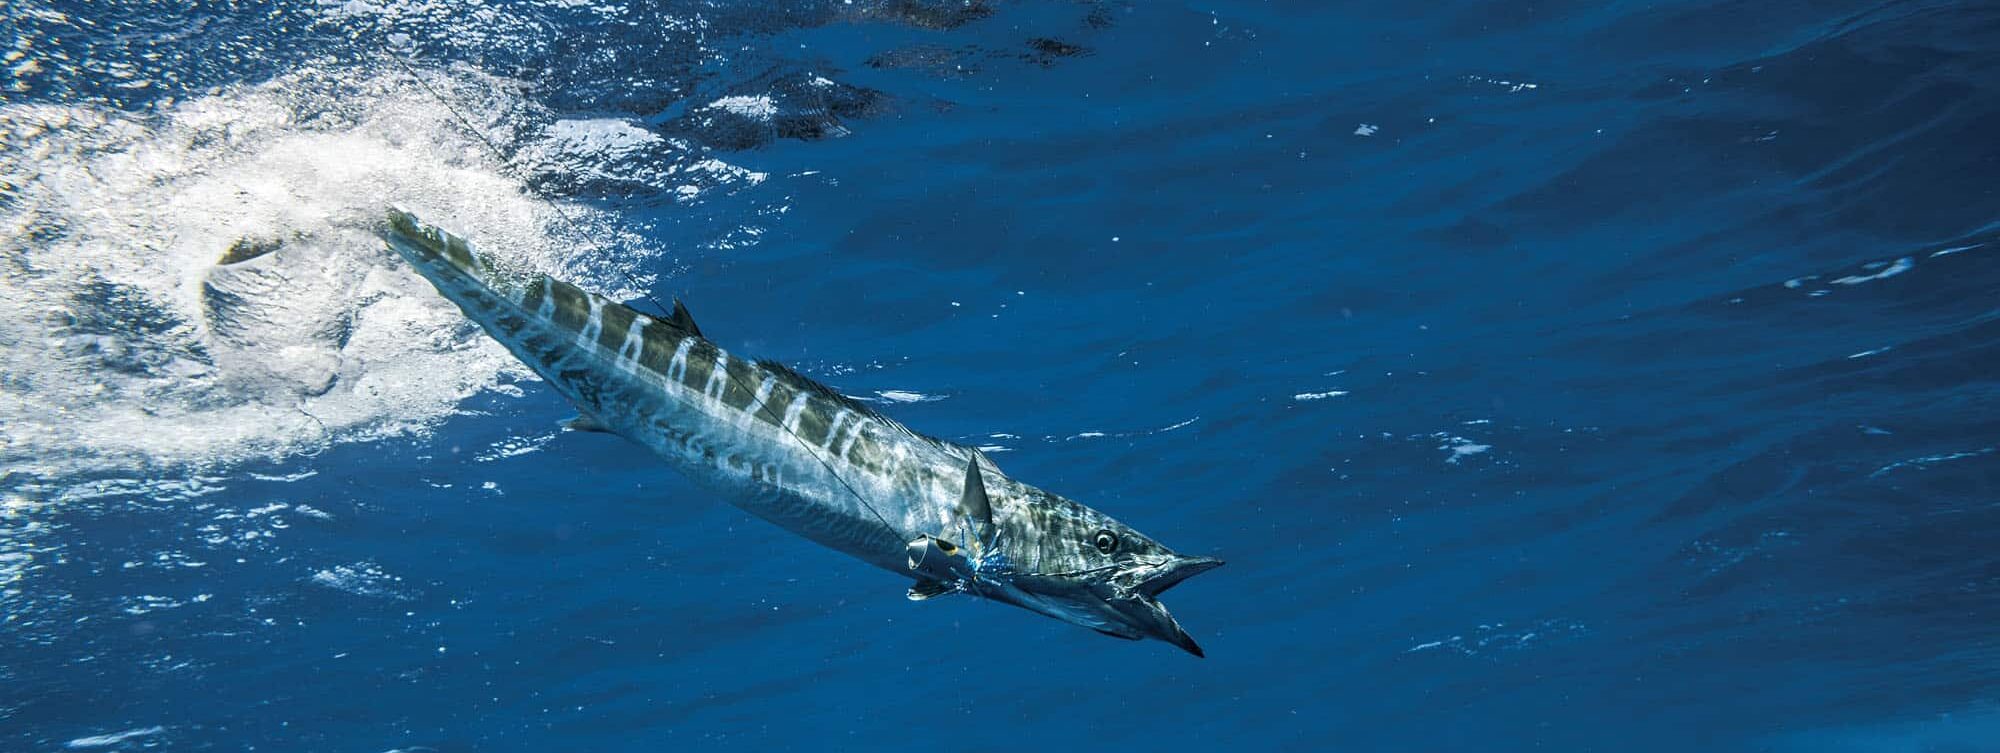 A wahoo fish swimming swiftly in the ocean, displaying its elongated body and iridescent blue back. Renowned as the fourth fastest fish in the ocean, the wahoo demonstrates speed and agility in its marine environment.